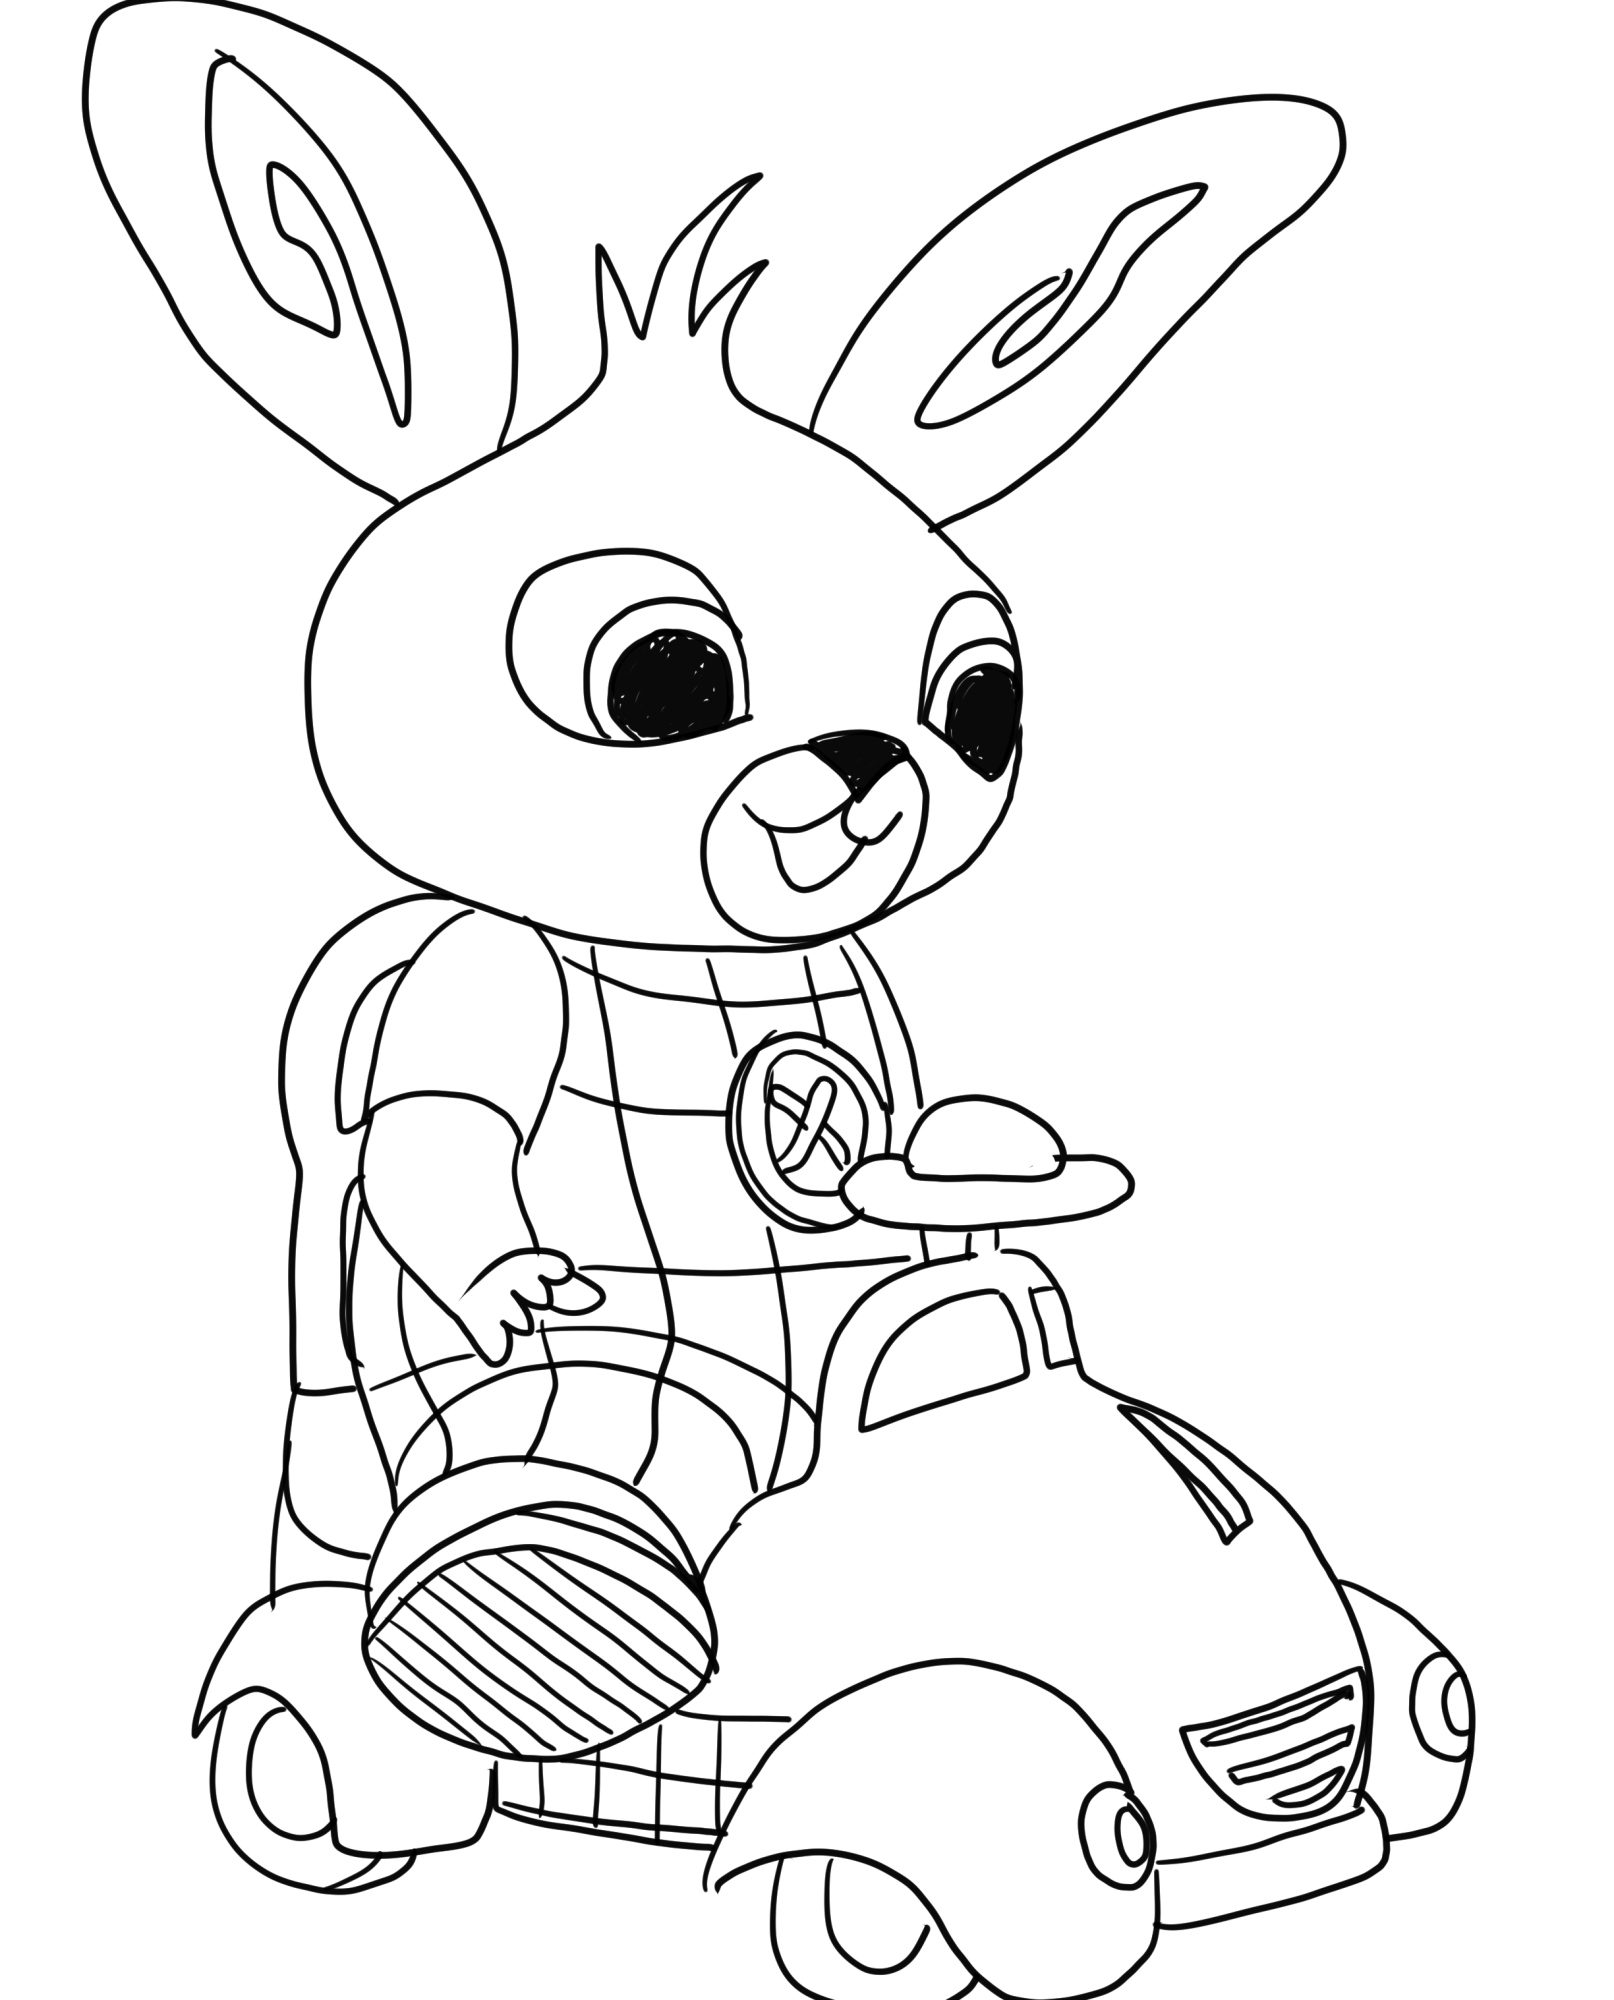 Bing on the Toy Car coloring page